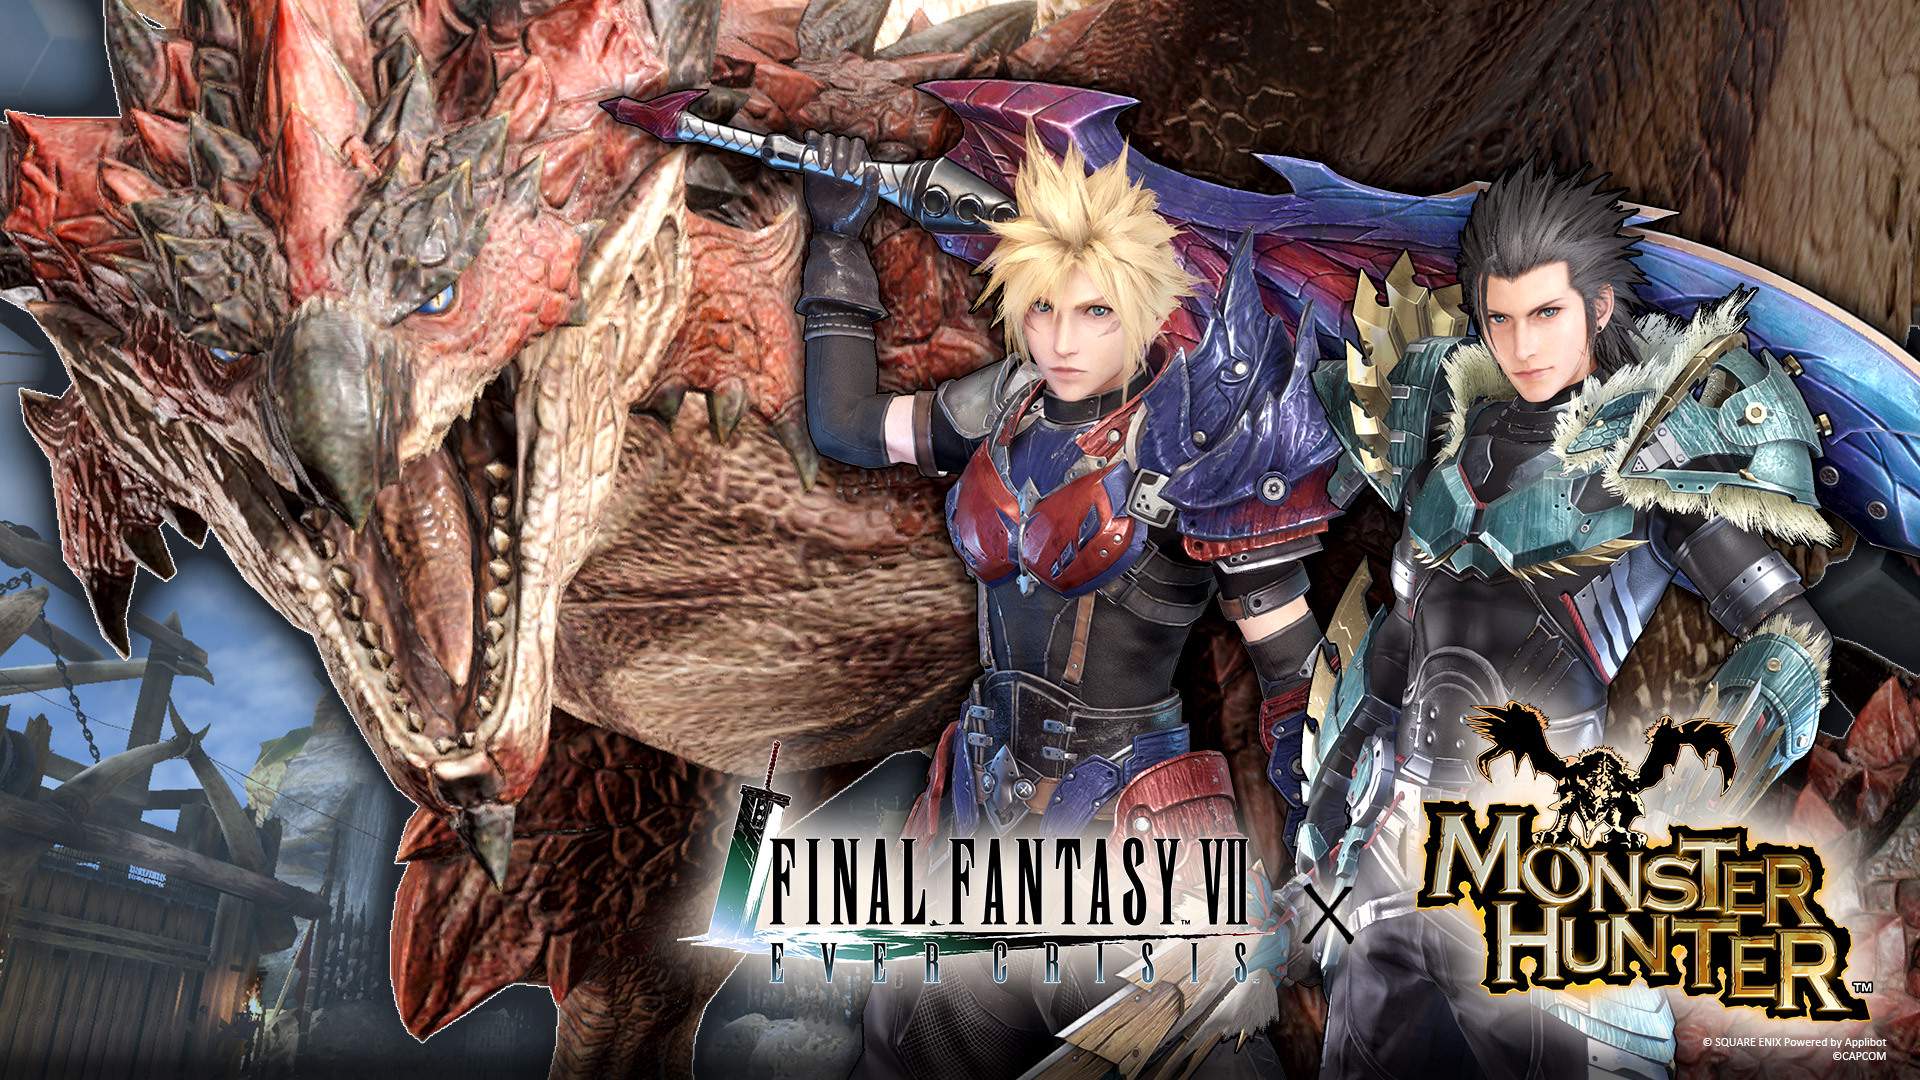 FINAL FANTASY VII EVER CRISIS x Monster Hunter Collaboration Cloud, Zack and Rathalos